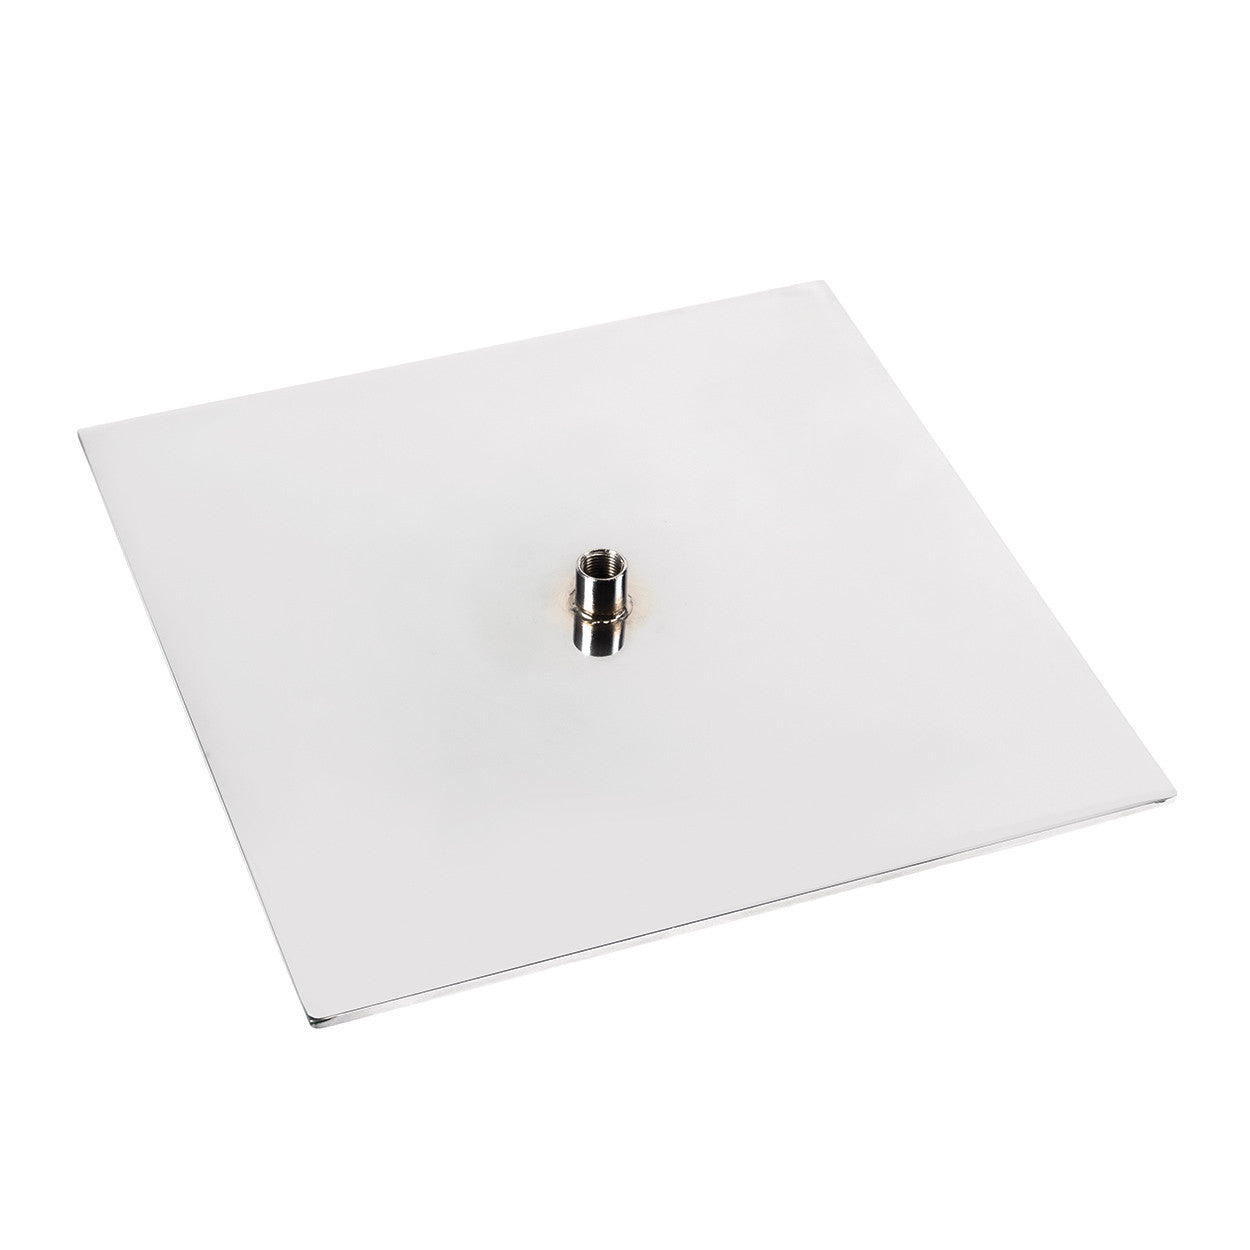 Signage Hardware Flat Base with Central Fixing - W200 x D200 x H15